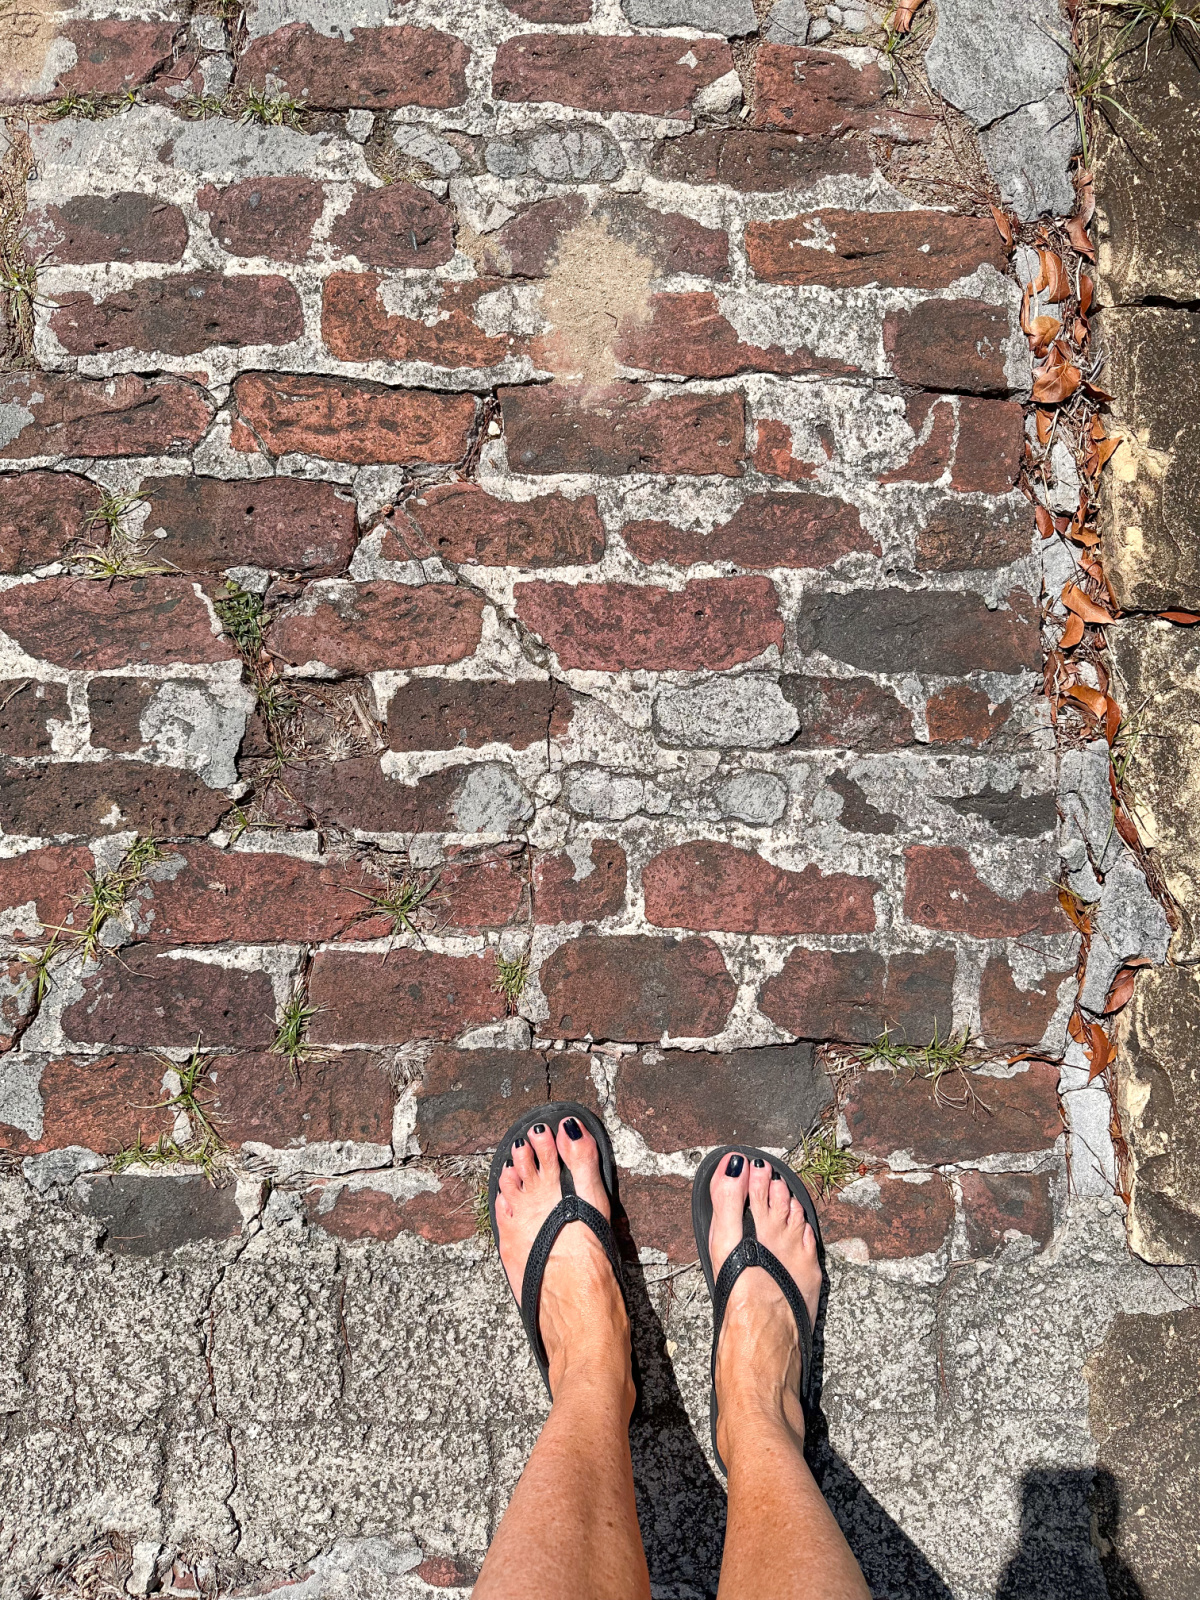 Flip flopped feet on old brick path at St. John's Cathedral, Antigua.